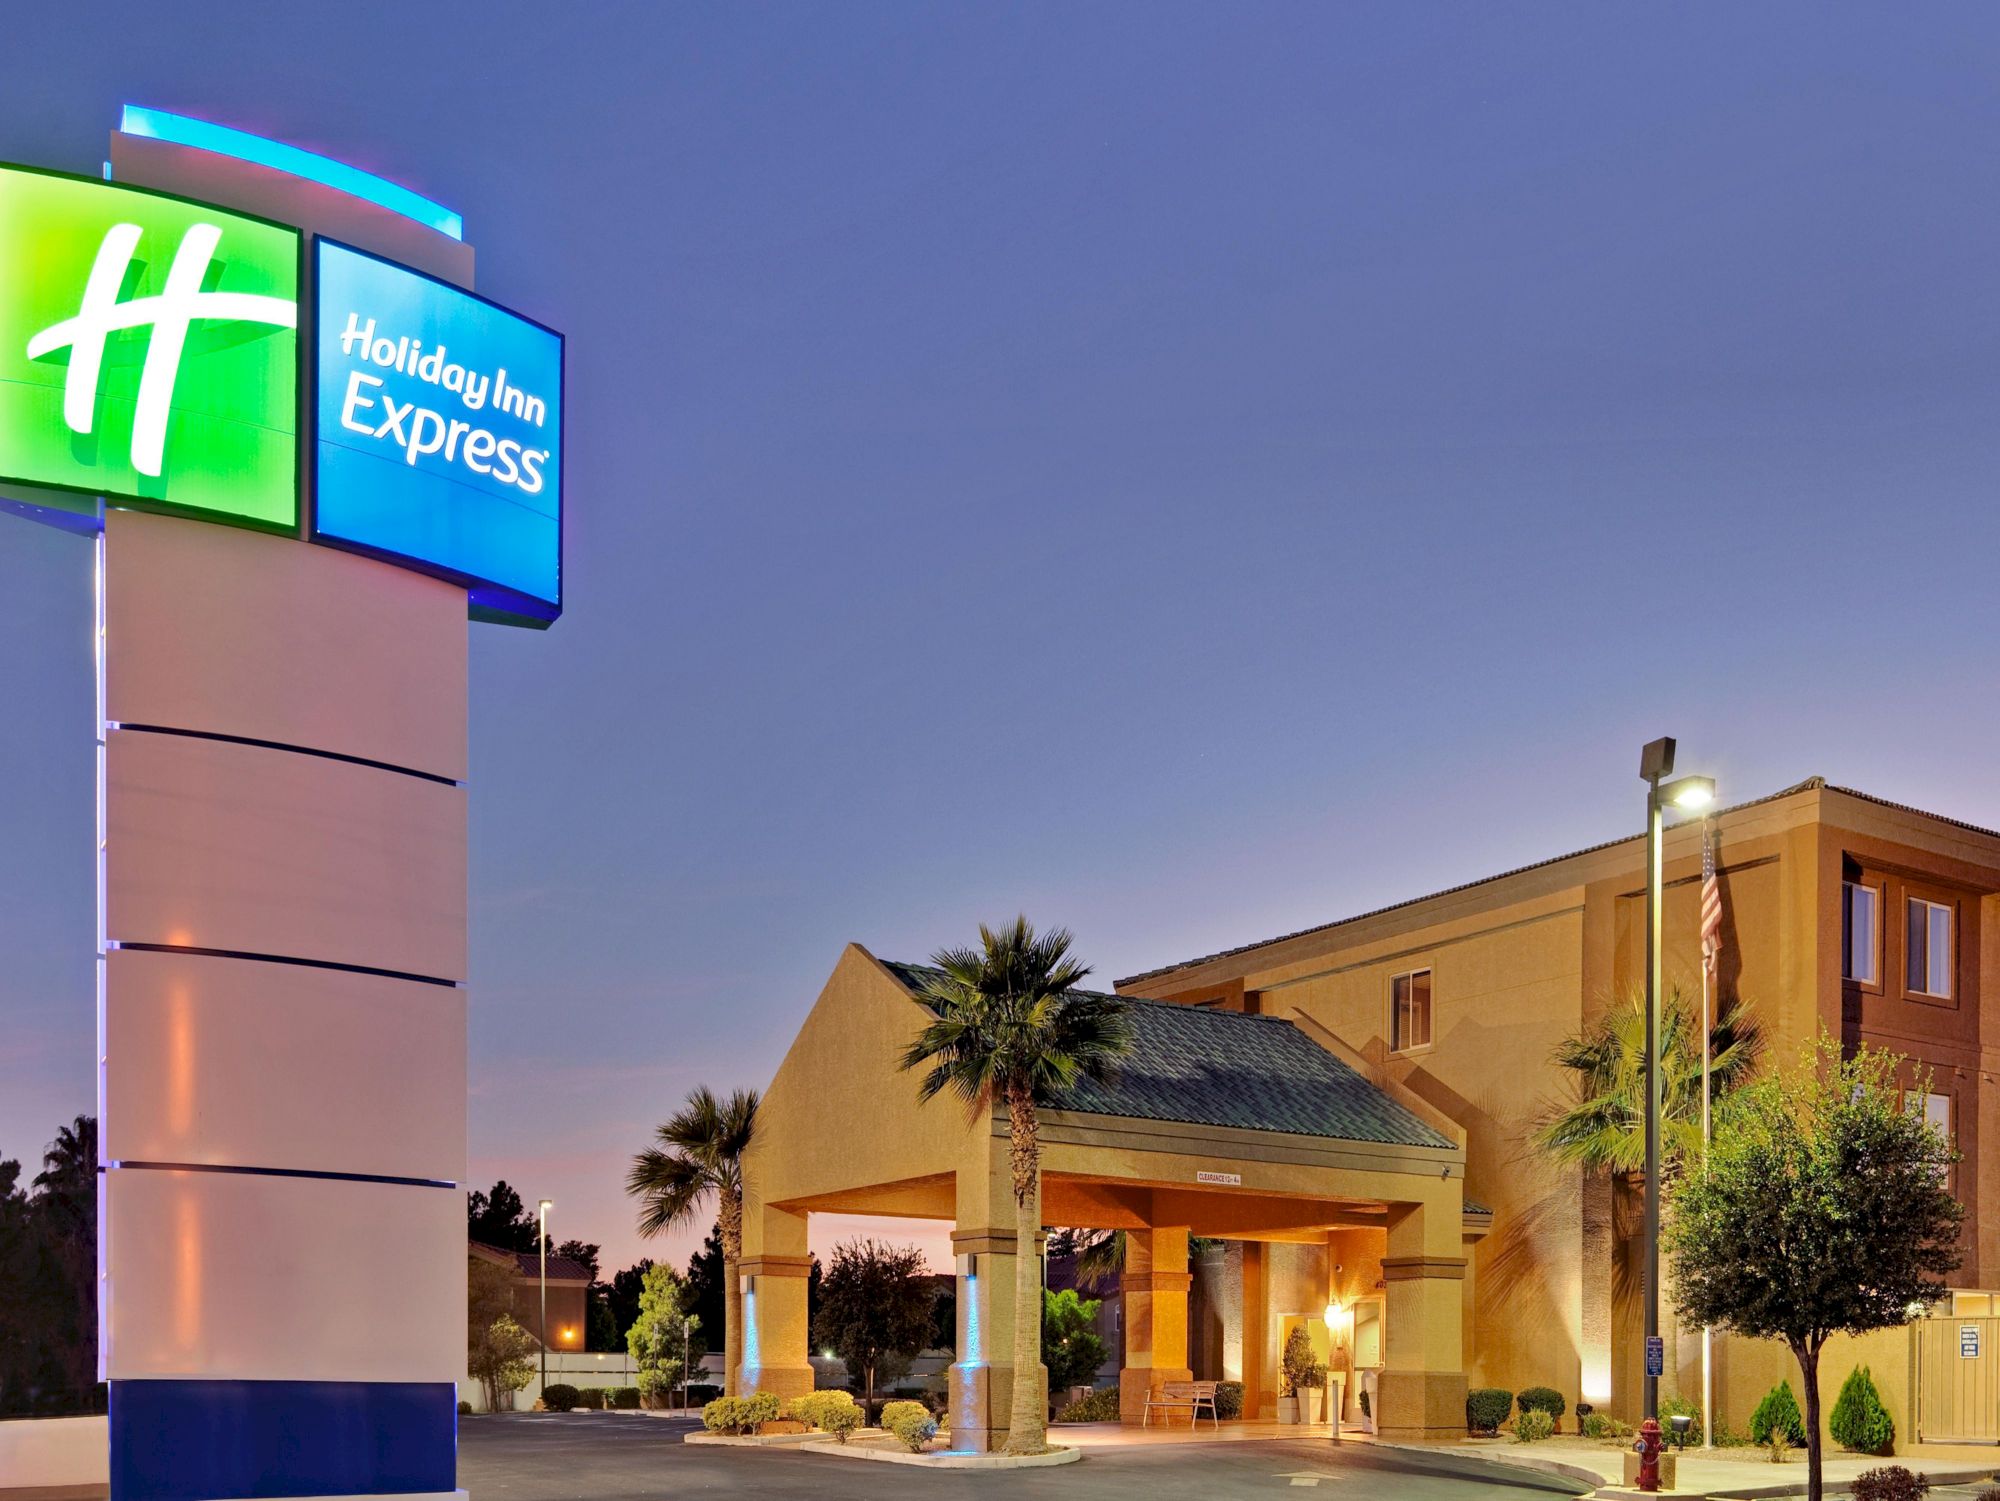 The image shows the exterior of a Holiday Inn Express hotel at dusk, with the hotel's sign prominently displayed and a well-lit entrance.